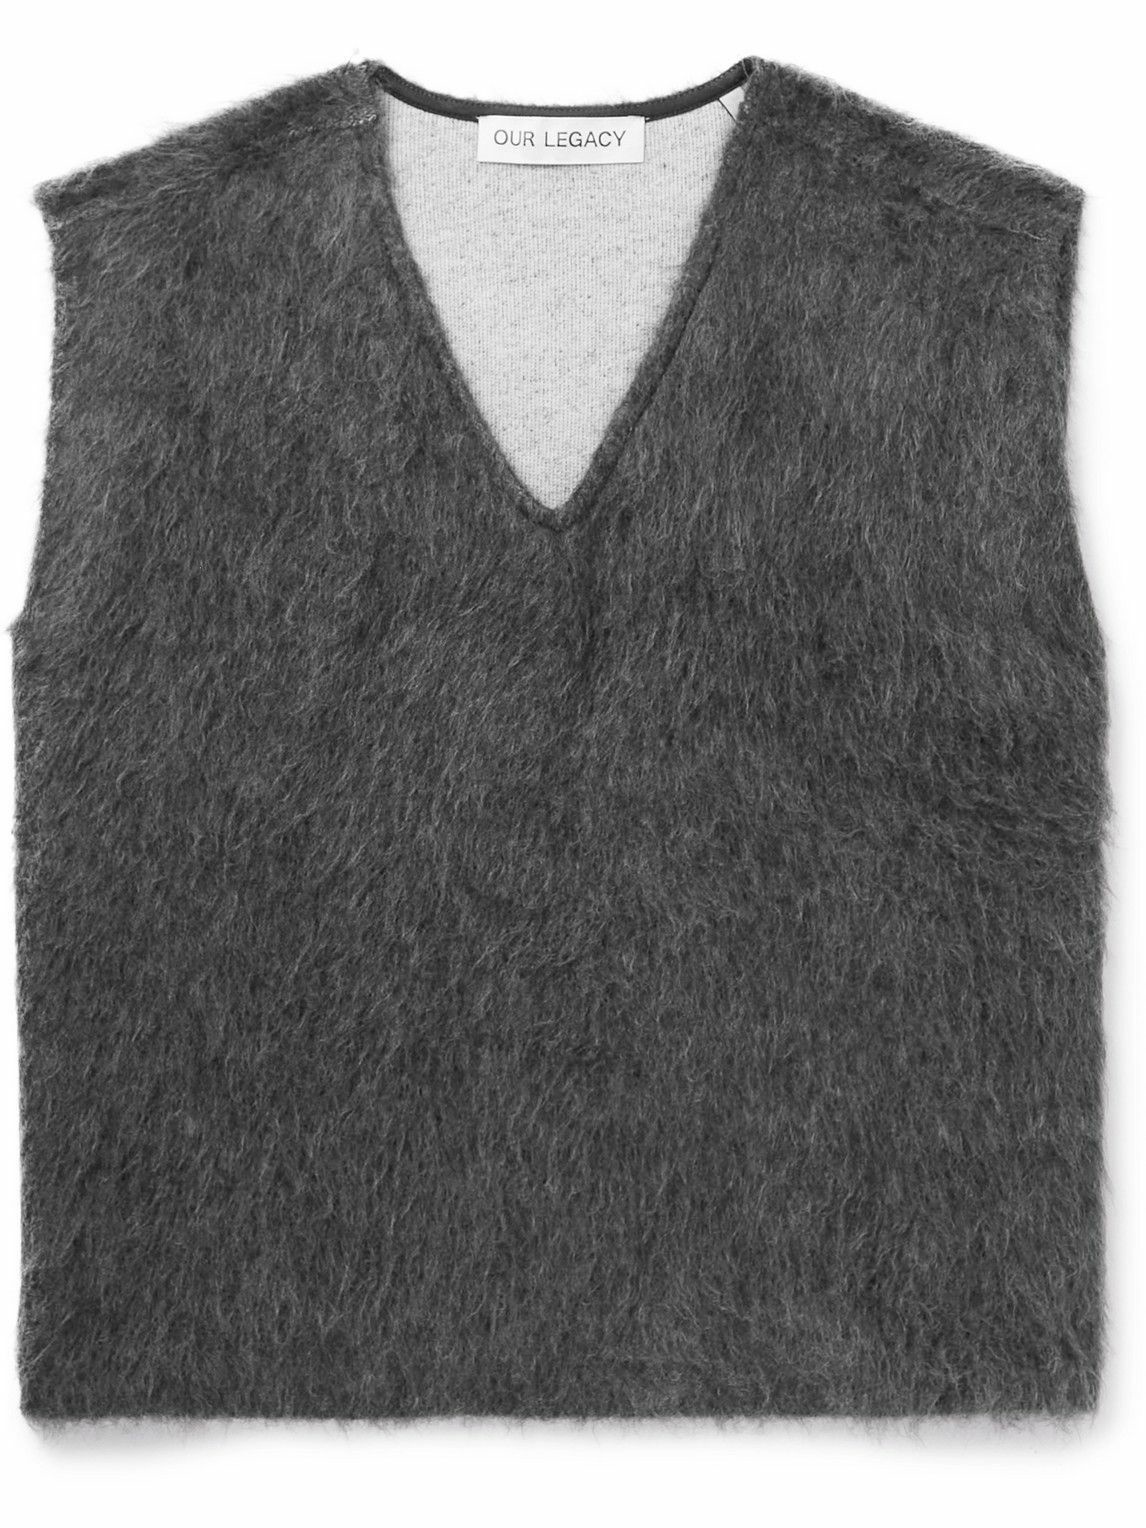 Our Legacy - Double Lock Brushed-Knit Sweater Vest - Gray